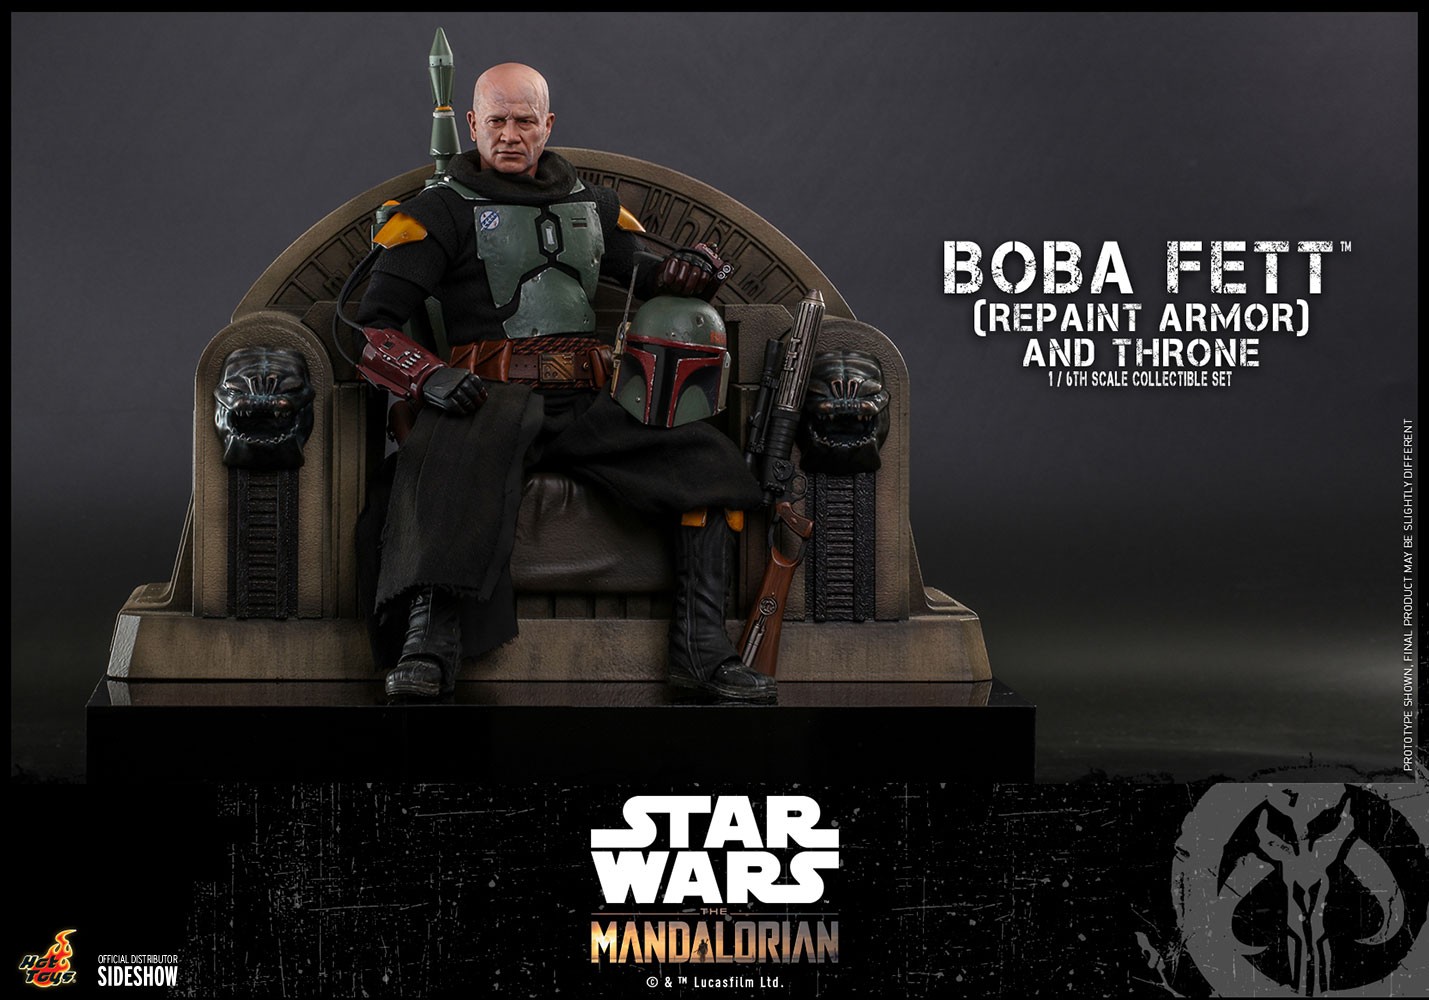 Boba Fett (Repaint Armor - Special Edition) and Throne Exclusive Edition (Prototype Shown) View 11